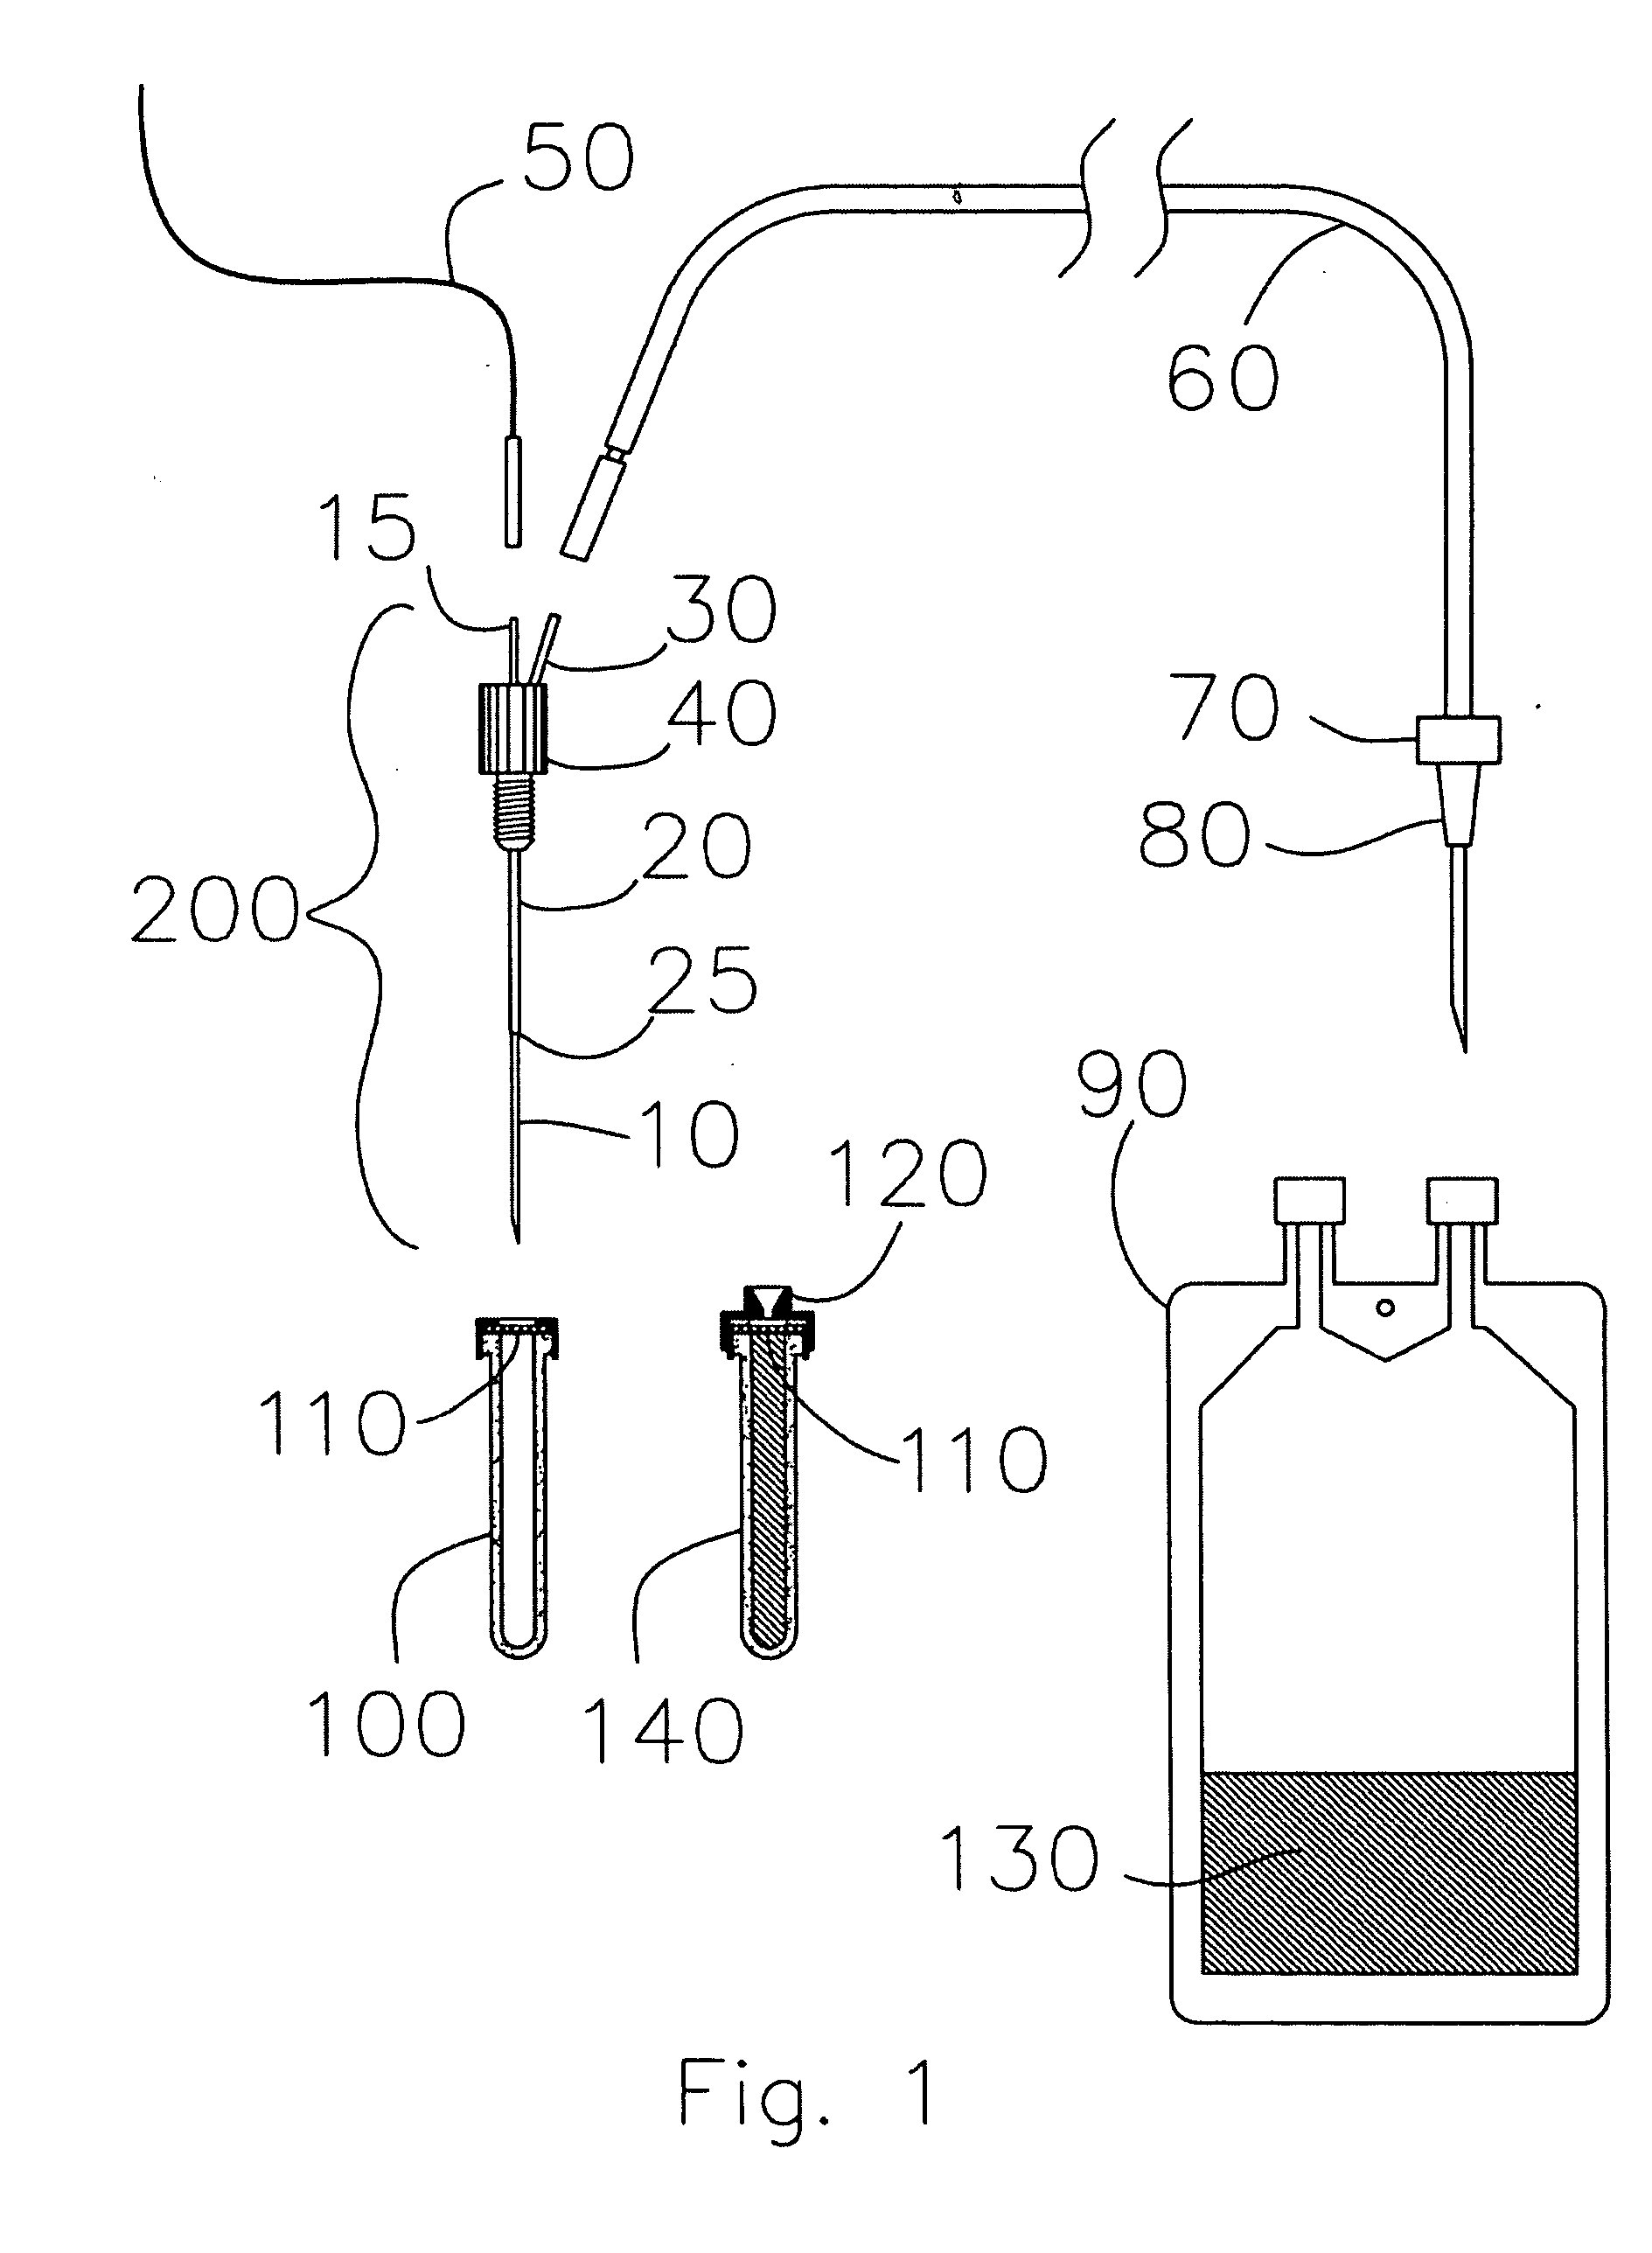 System and method for sample collection